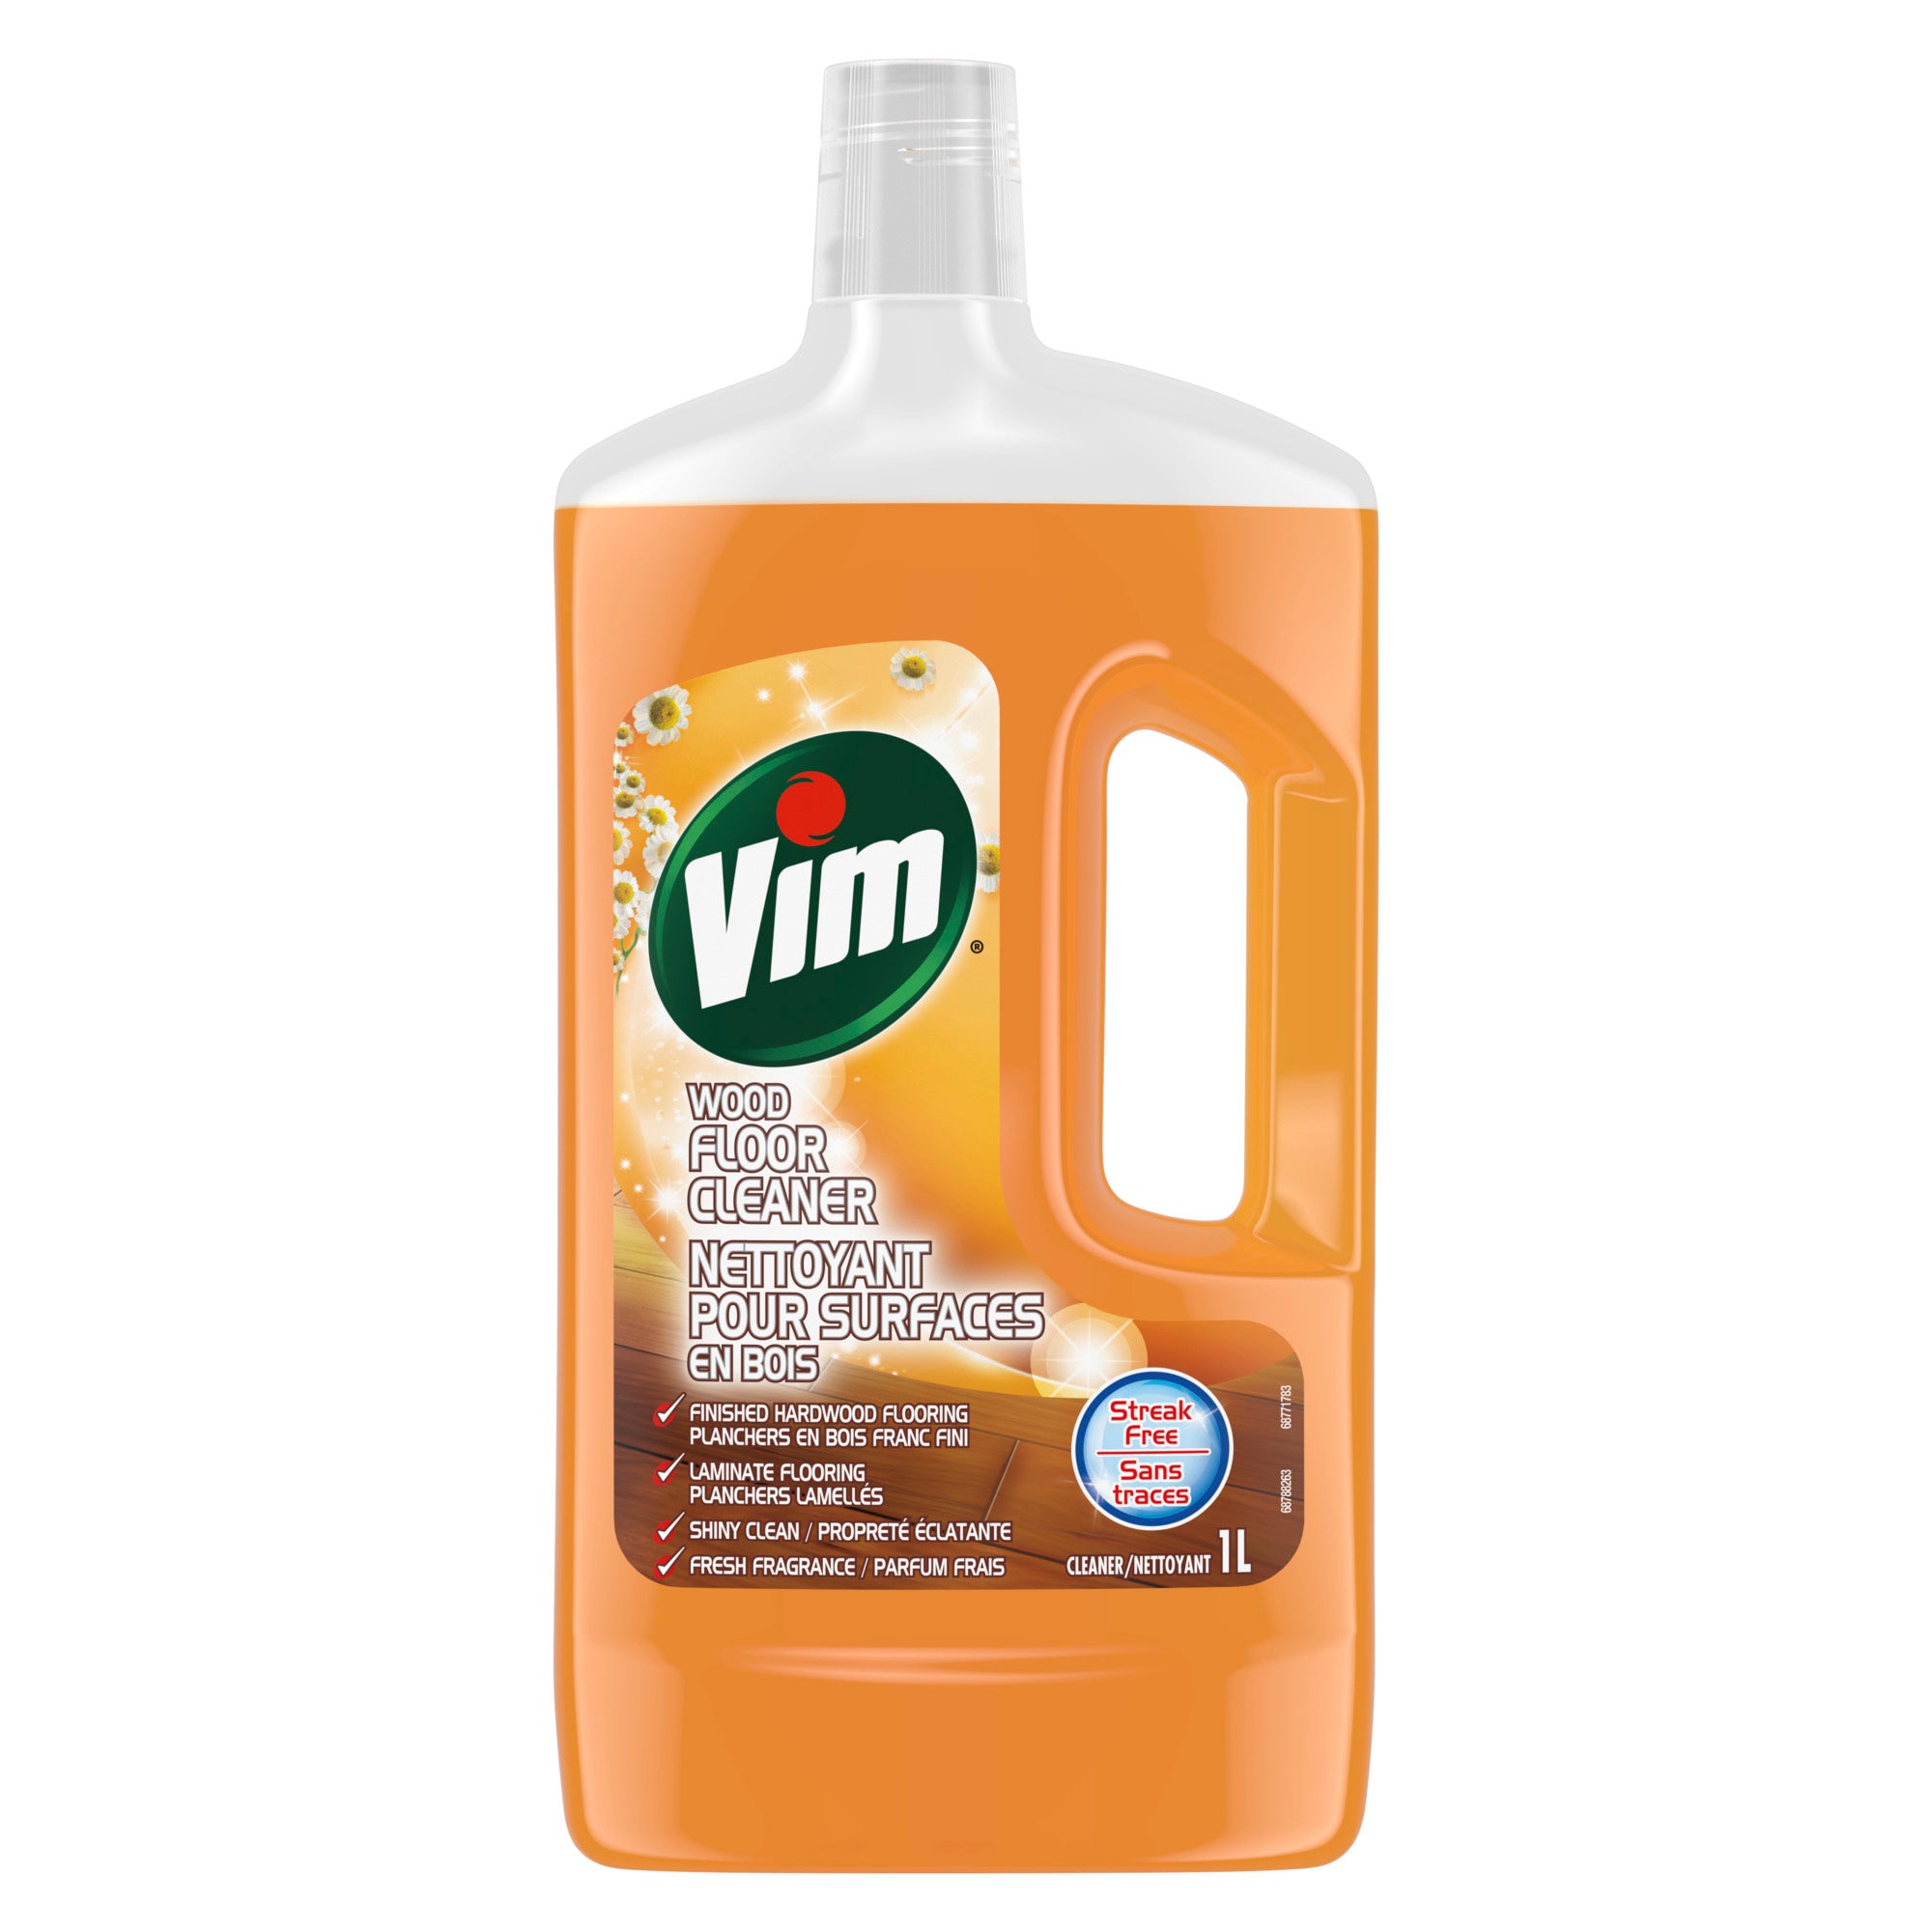 Showing the front angle view of the orange Vim Wood Floor Cleaner 1L product packaging.